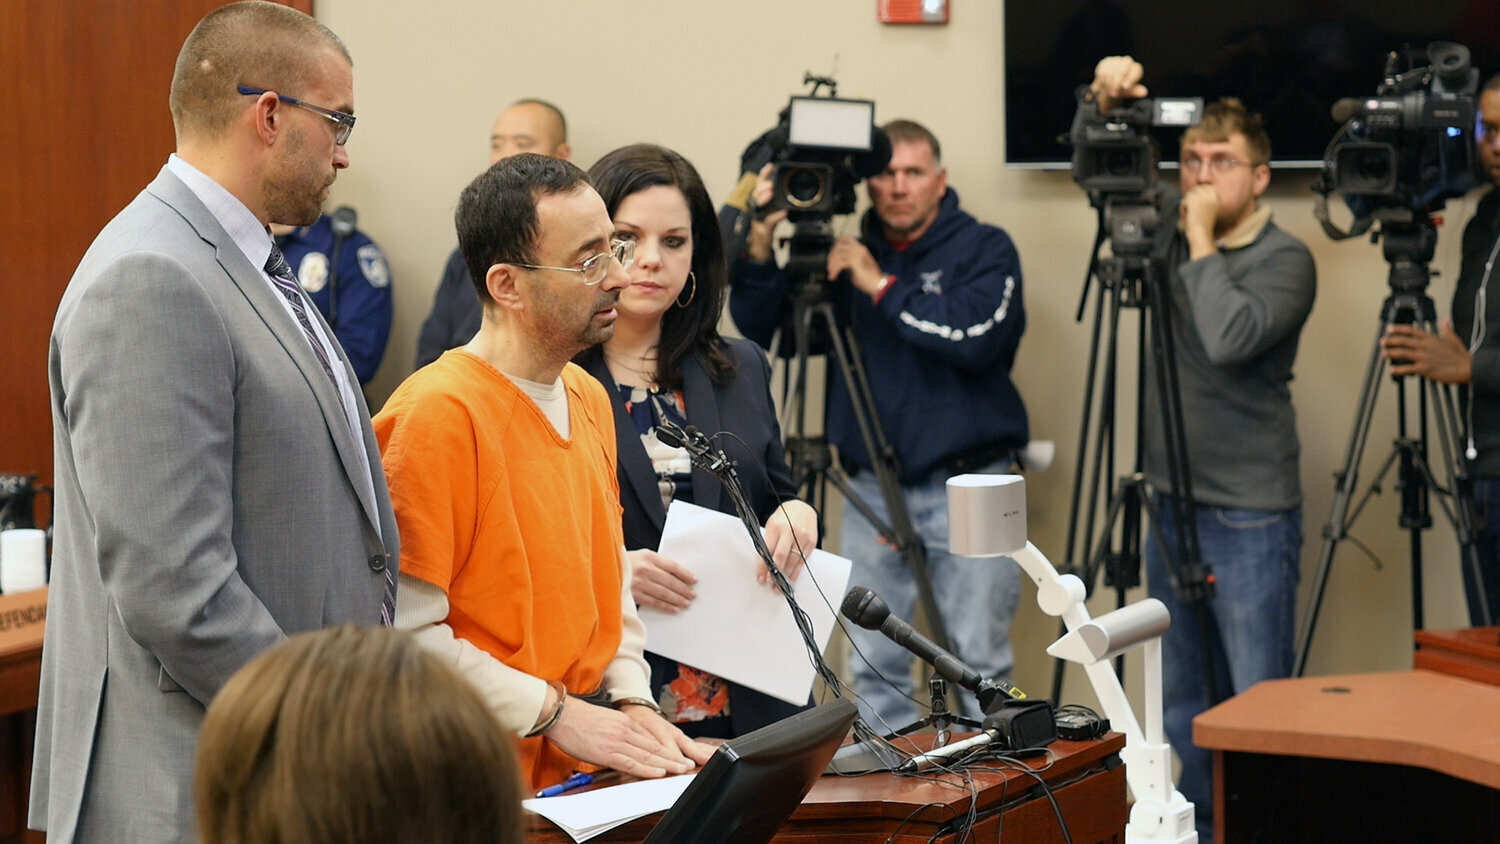 Dr. Larry Nassar in the courtroom in a scene from the documentary “At The Heart of Gold: Inside the USA Gymnastics Scandal.”